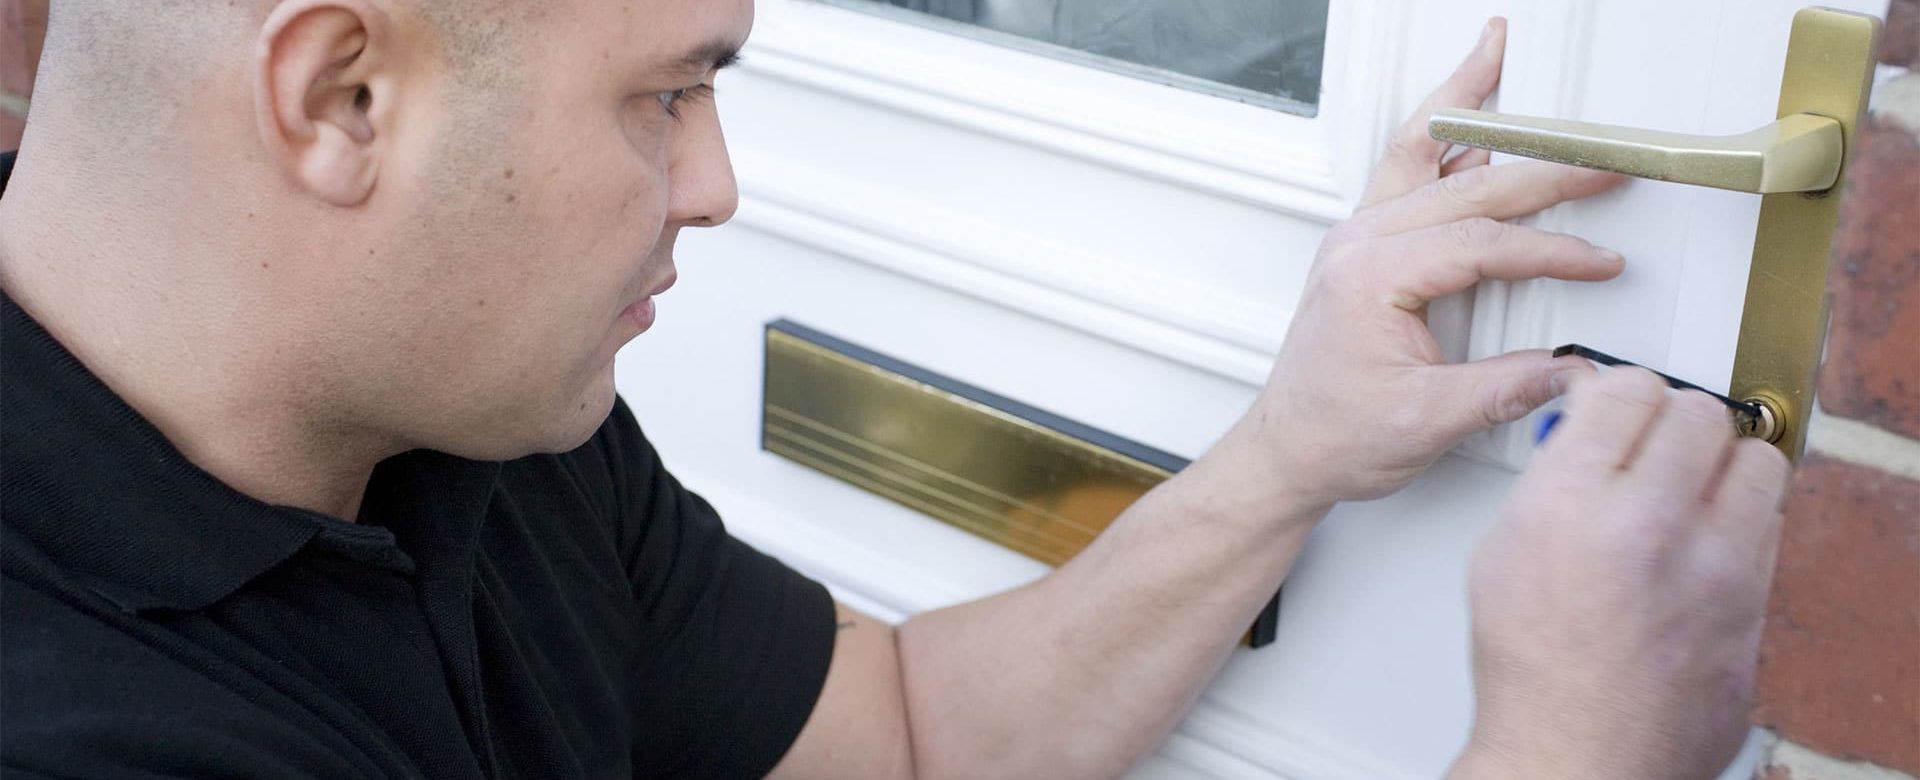 home entry door opened by locksmith